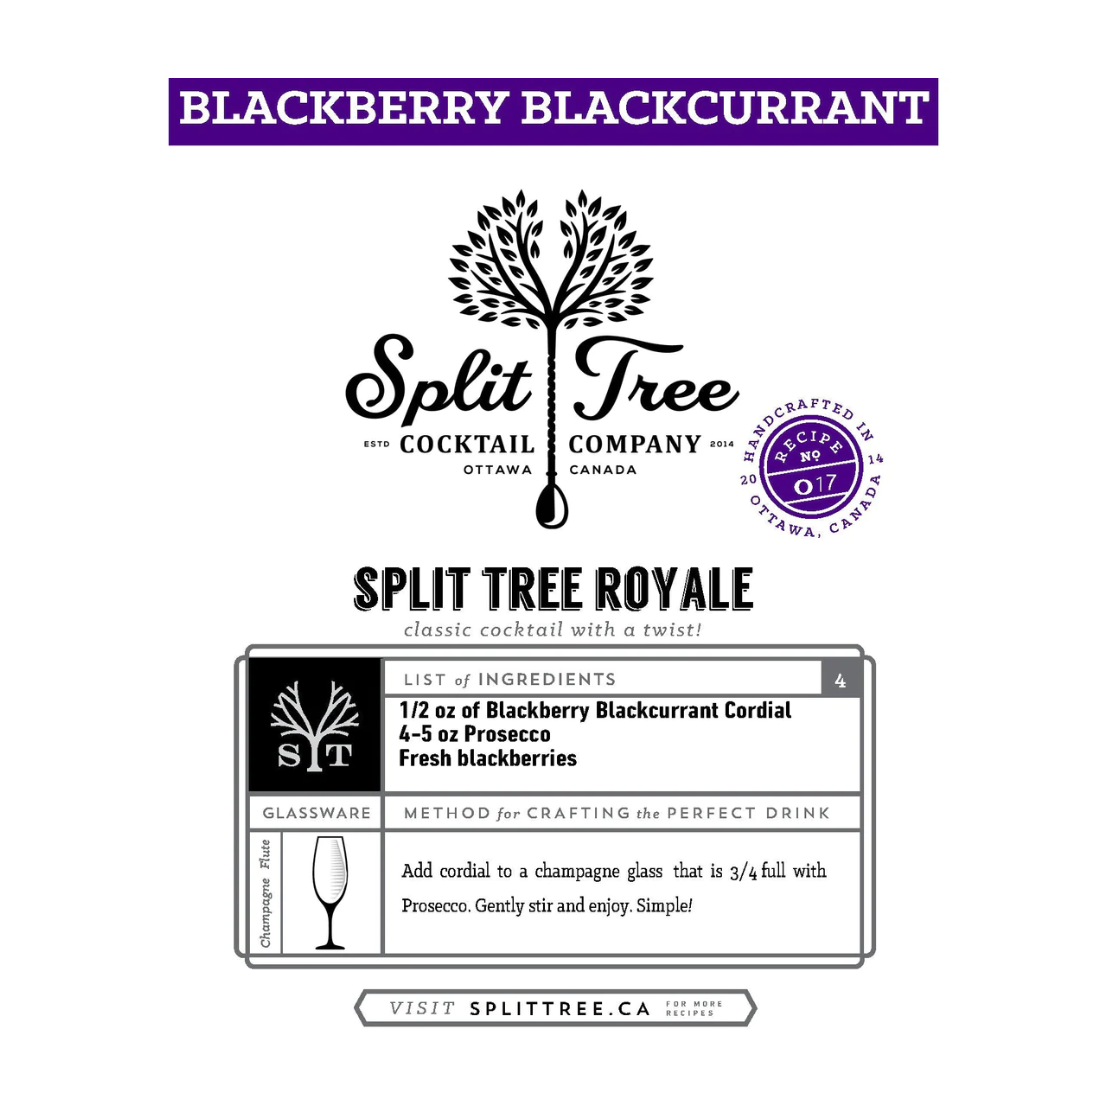 BLACKBERRY & BLACKCURRANT CORDIAL by SPLIT TREE COCKTAIL CO